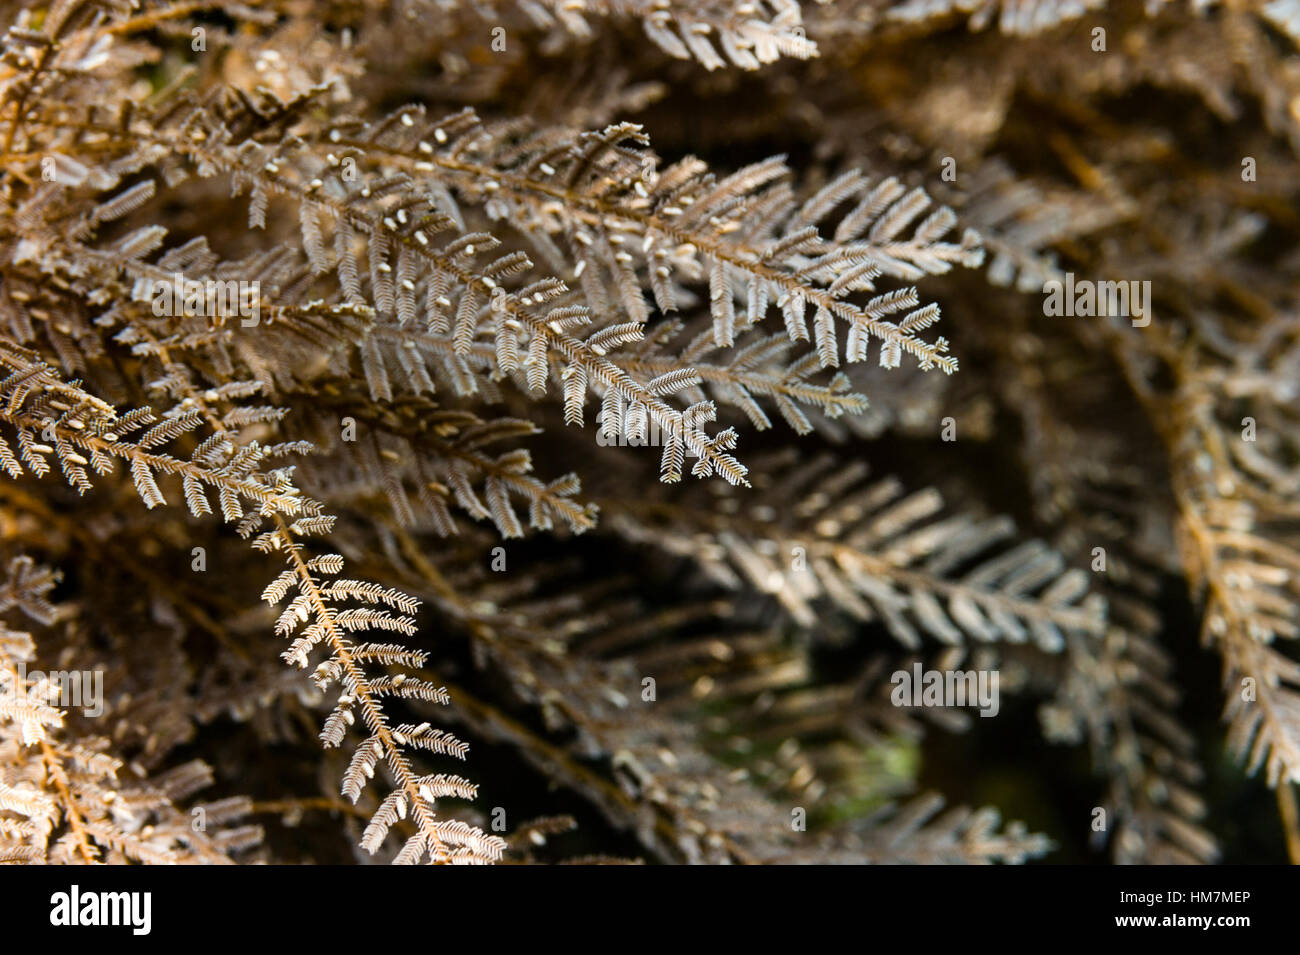 A stinging hydrozoan colony on a coral reef. Stock Photo